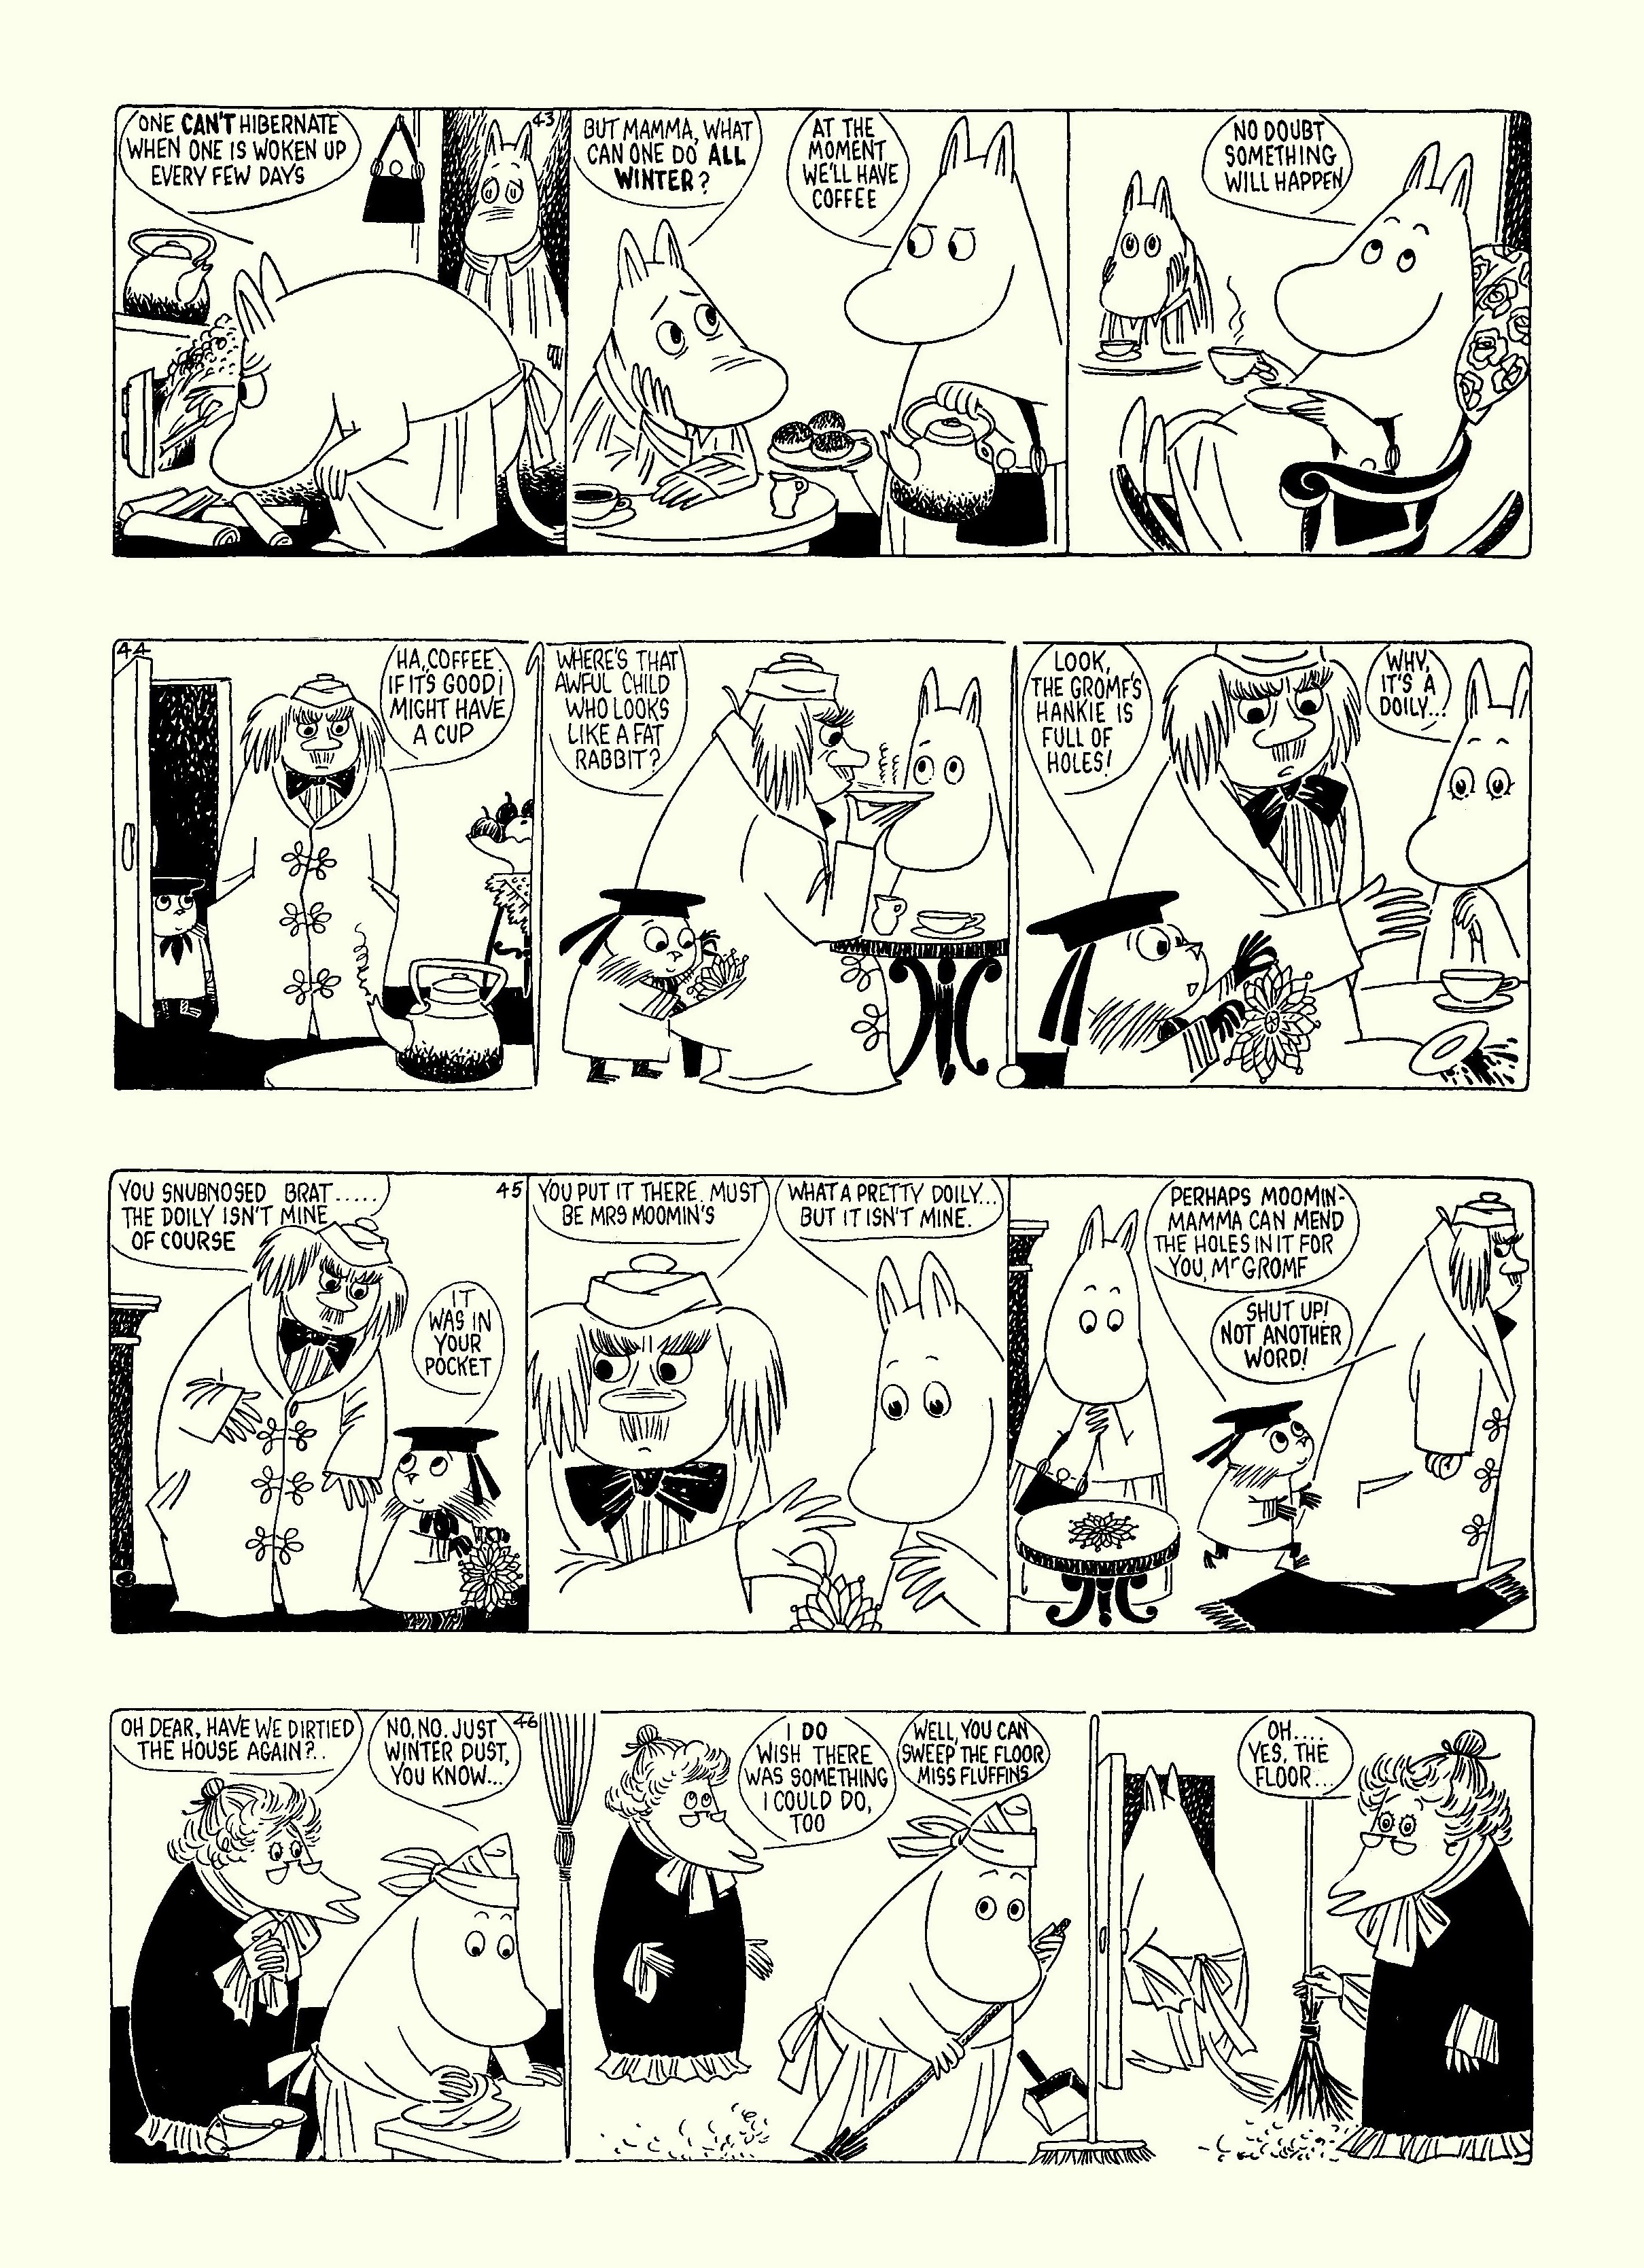 Read online Moomin: The Complete Tove Jansson Comic Strip comic -  Issue # TPB 5 - 17